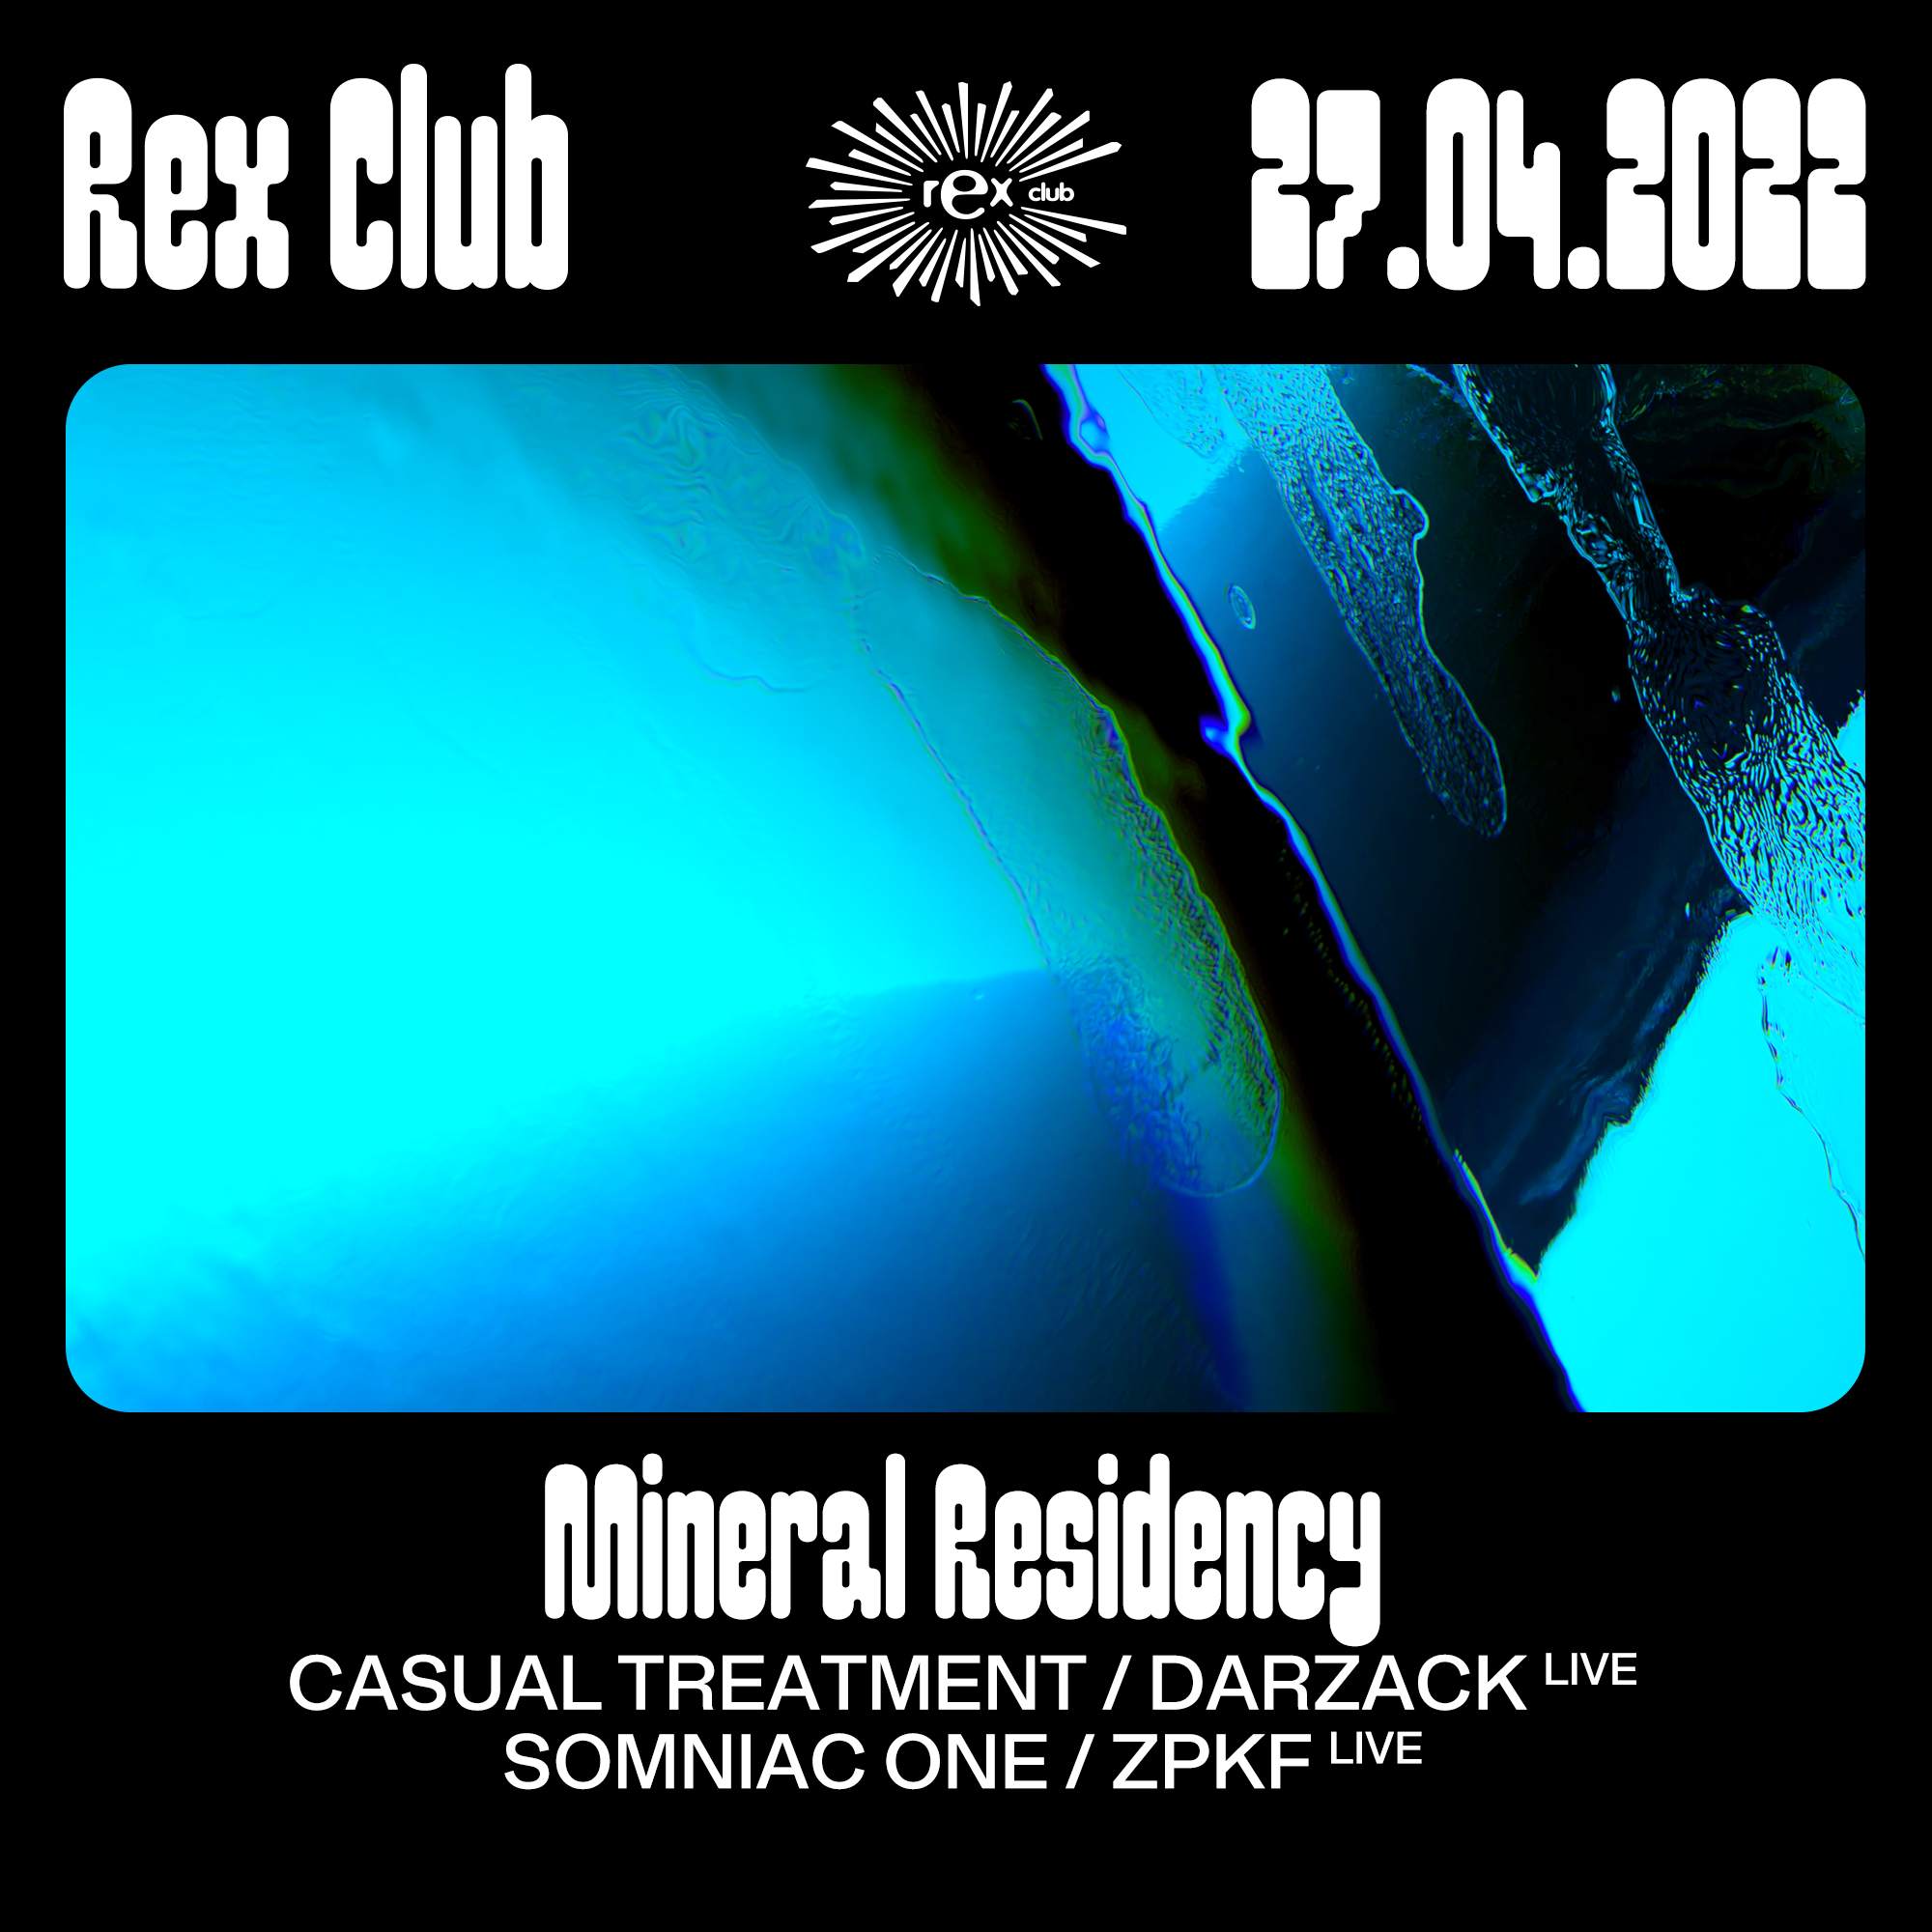 Mineral Residency: Darzack Live, Casual Treatment, Somniac One, ZPKF Live - フライヤー表